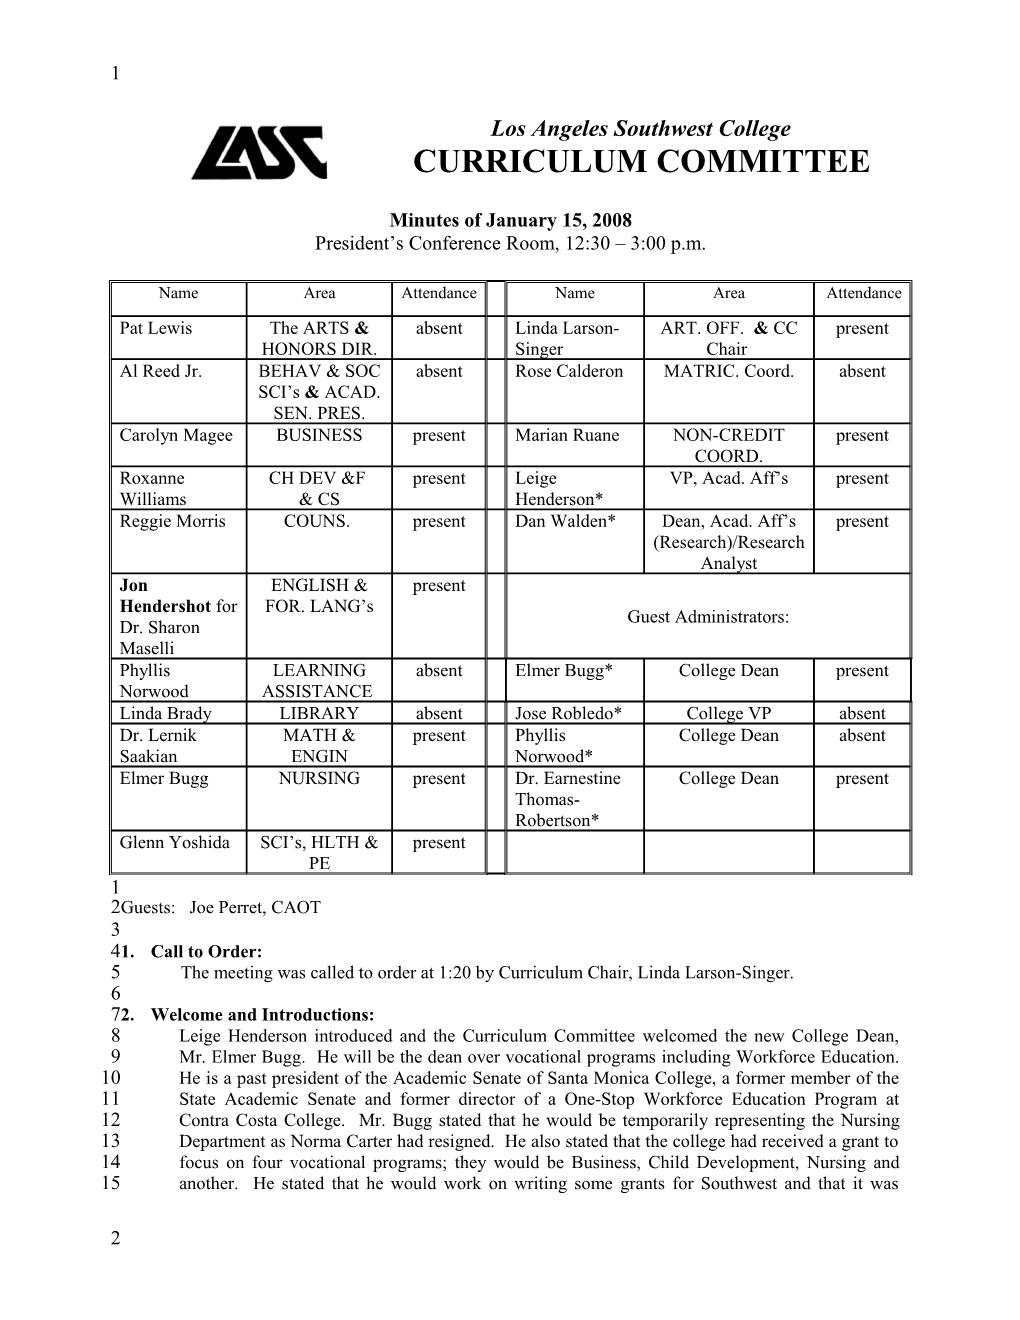 Los Angelessouthwestcollege; Curriculum Committee, Minutes of January 15, 2008 Page 1 of 4